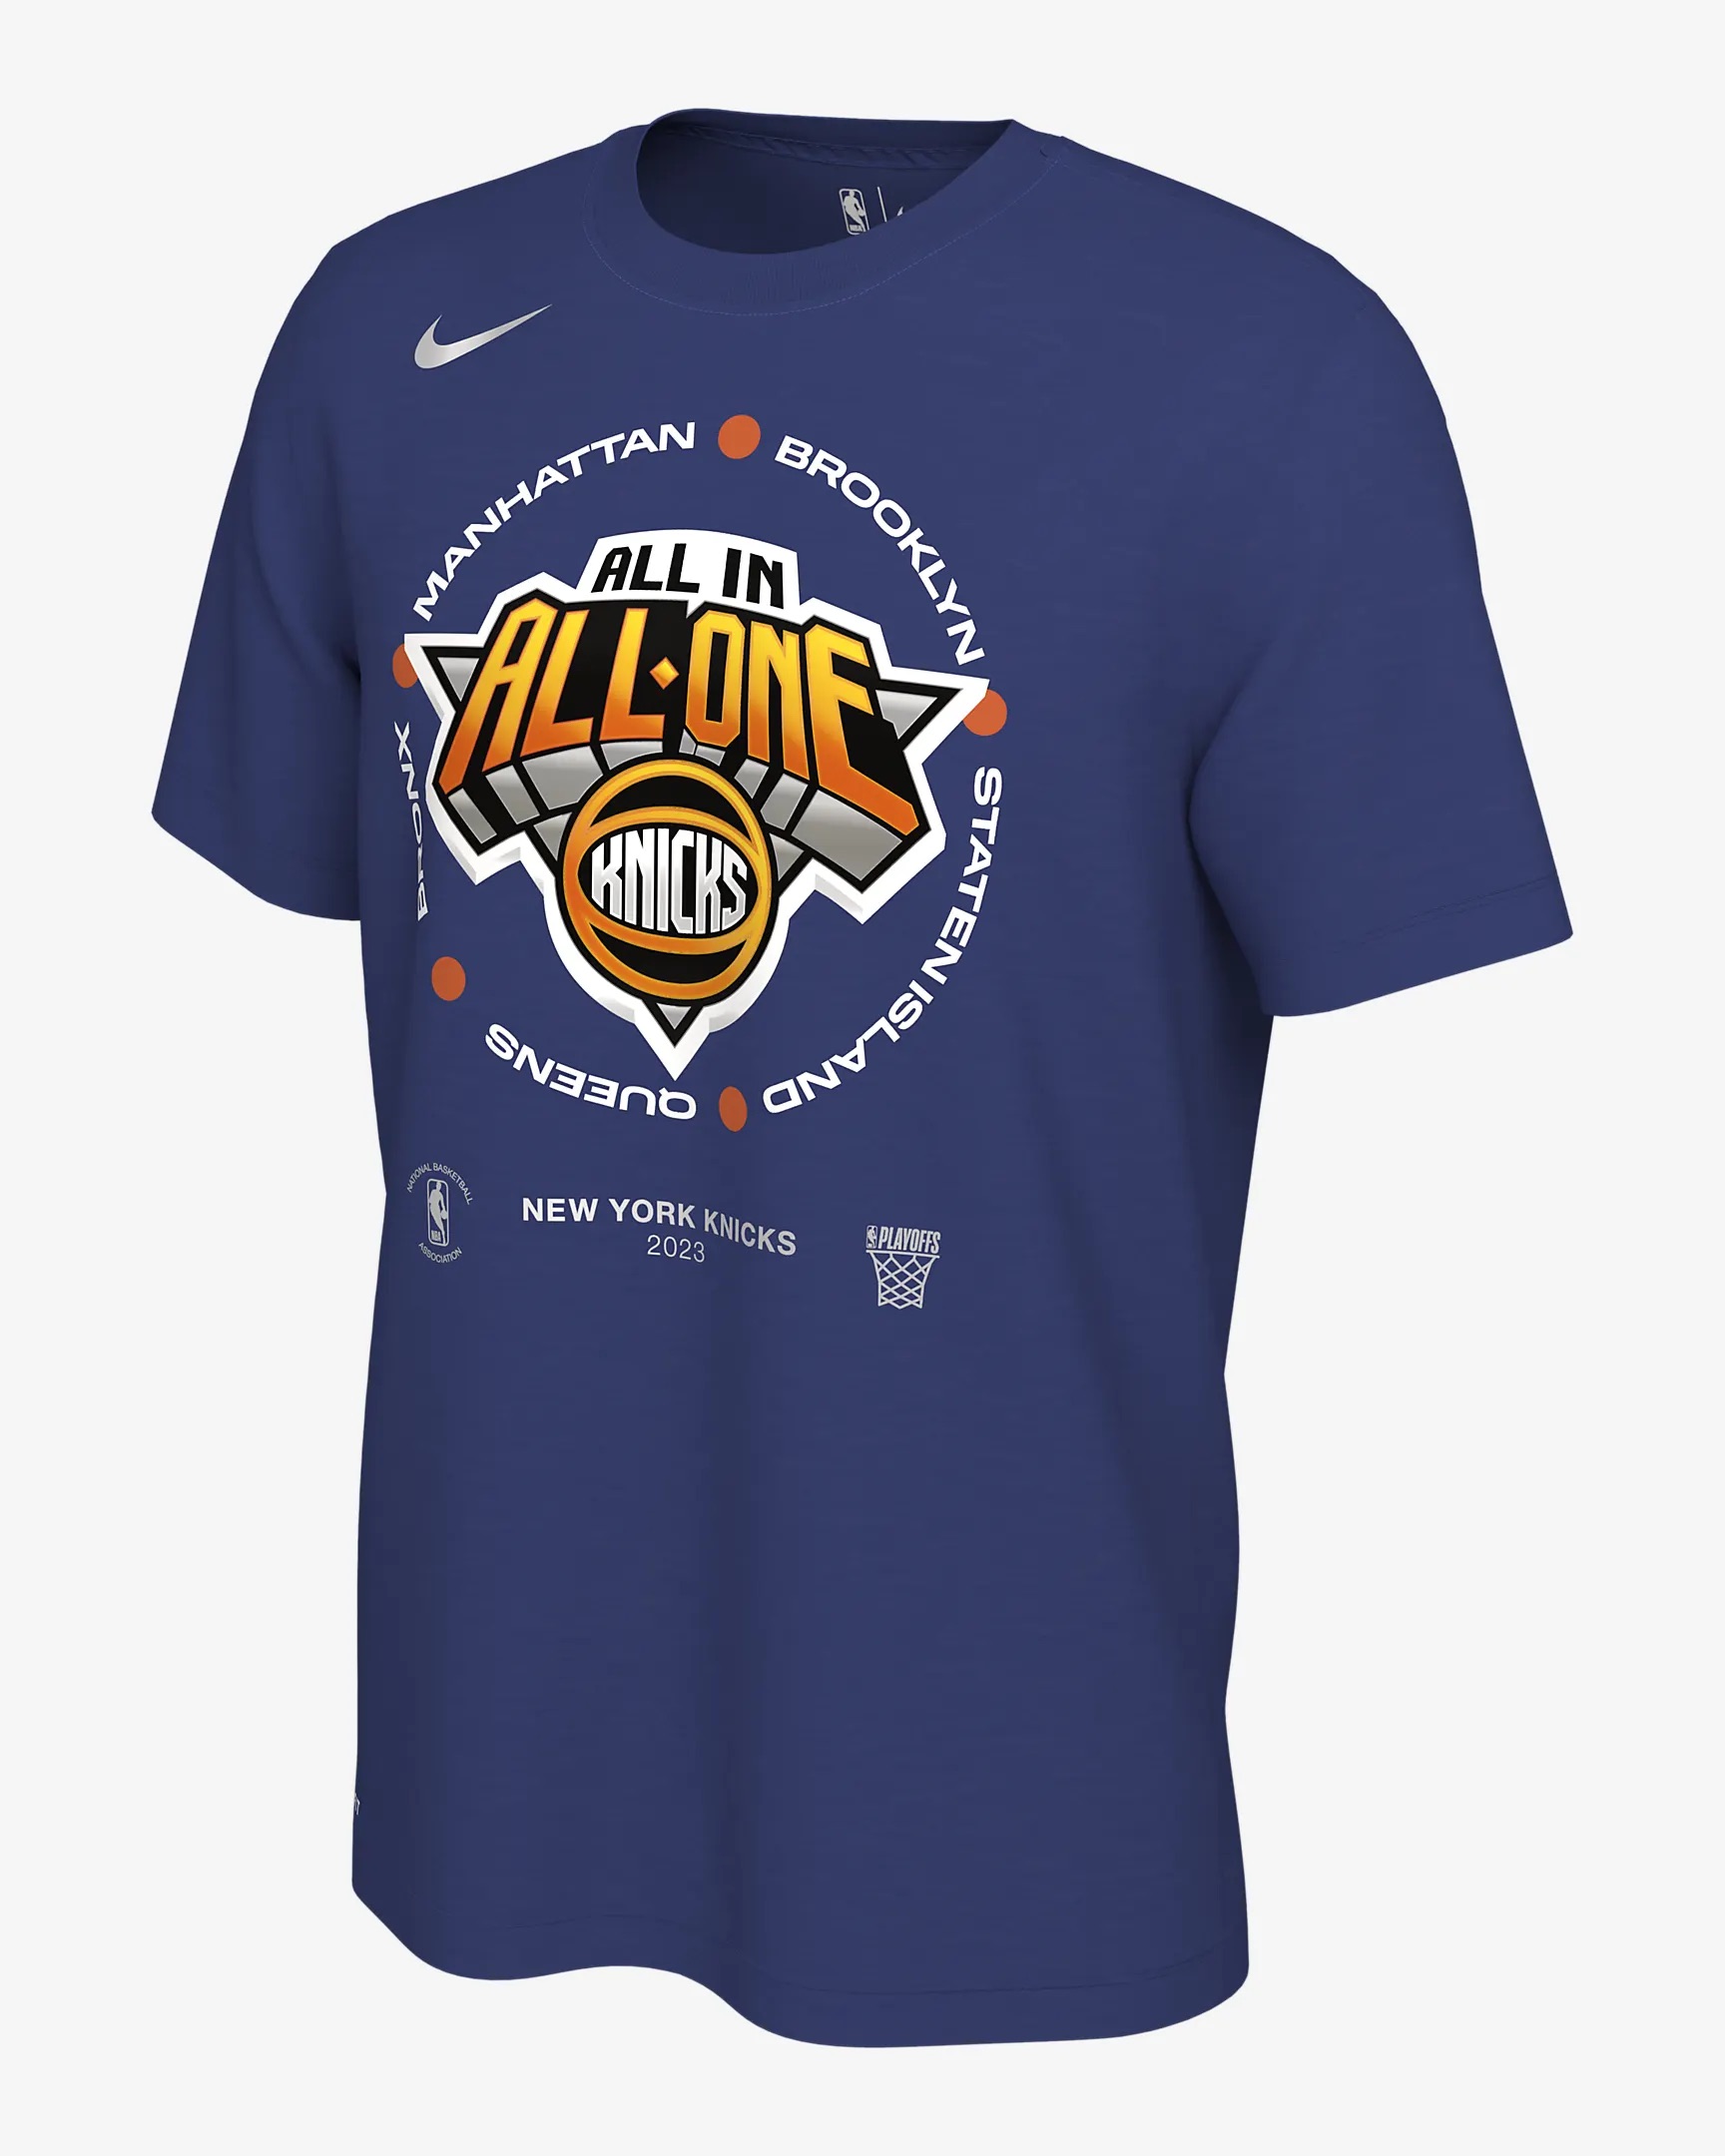 Nike 2023 NBA Playoffs T-Shirts Released